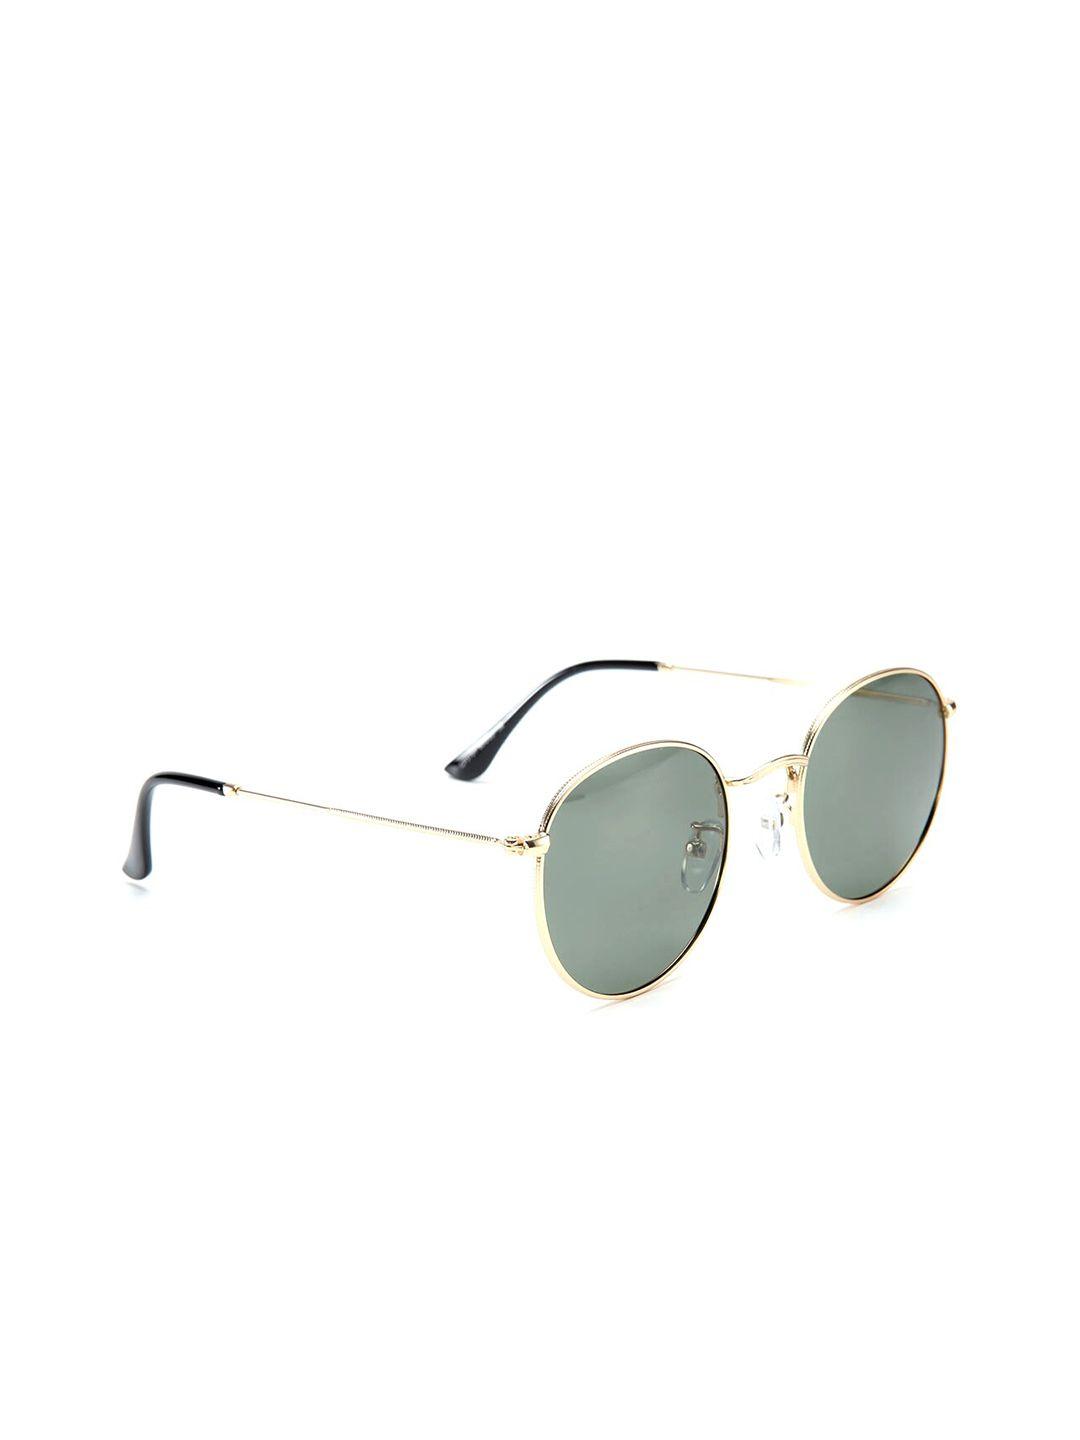 intellilens unisex green lens & gold-toned round sunglasses with uv protected lens